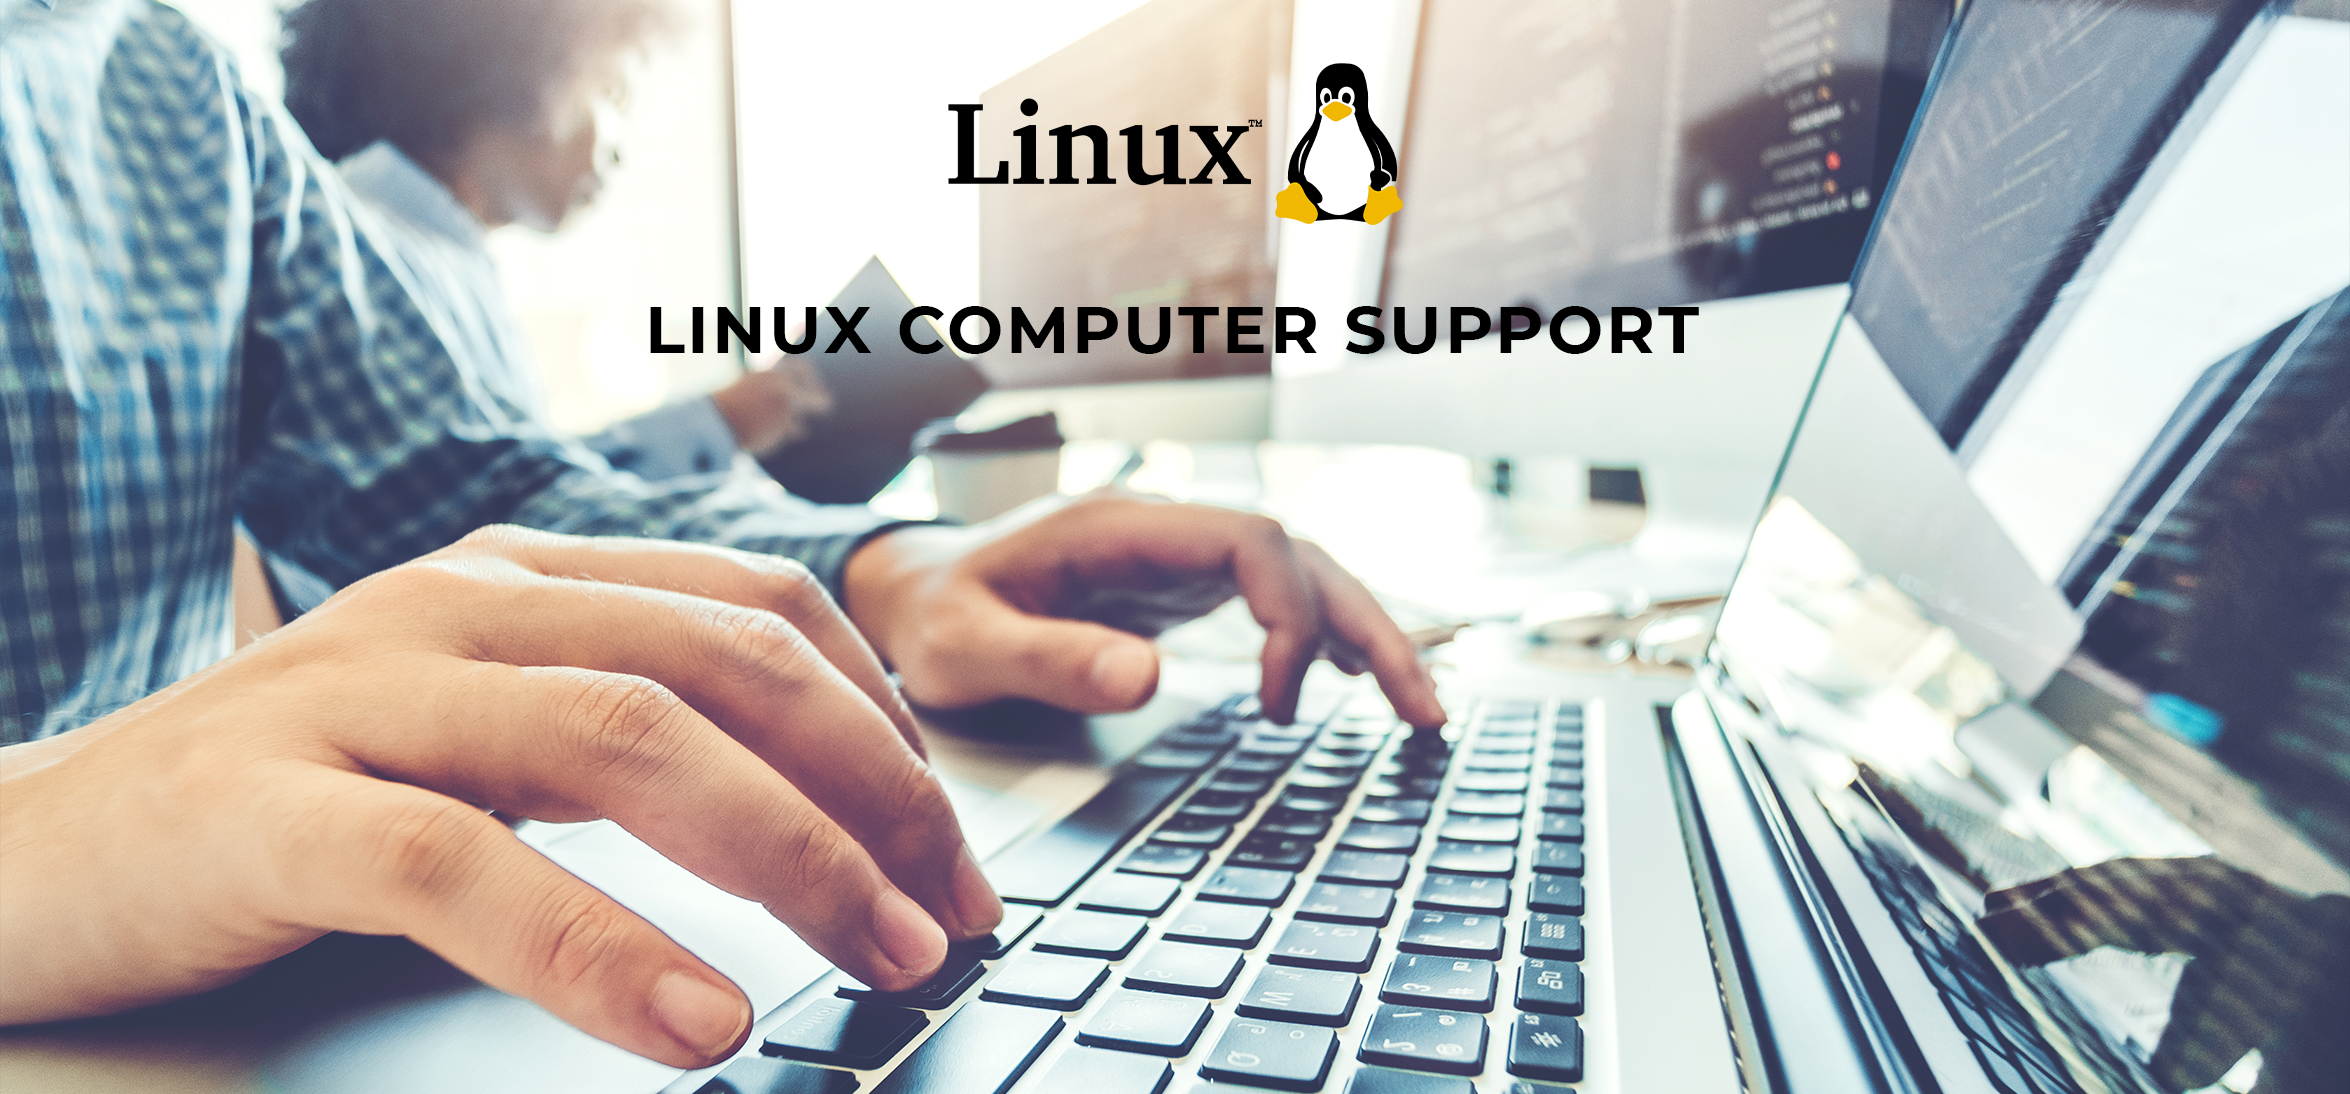 Support for Linux Servers in Bonita CA, 91908